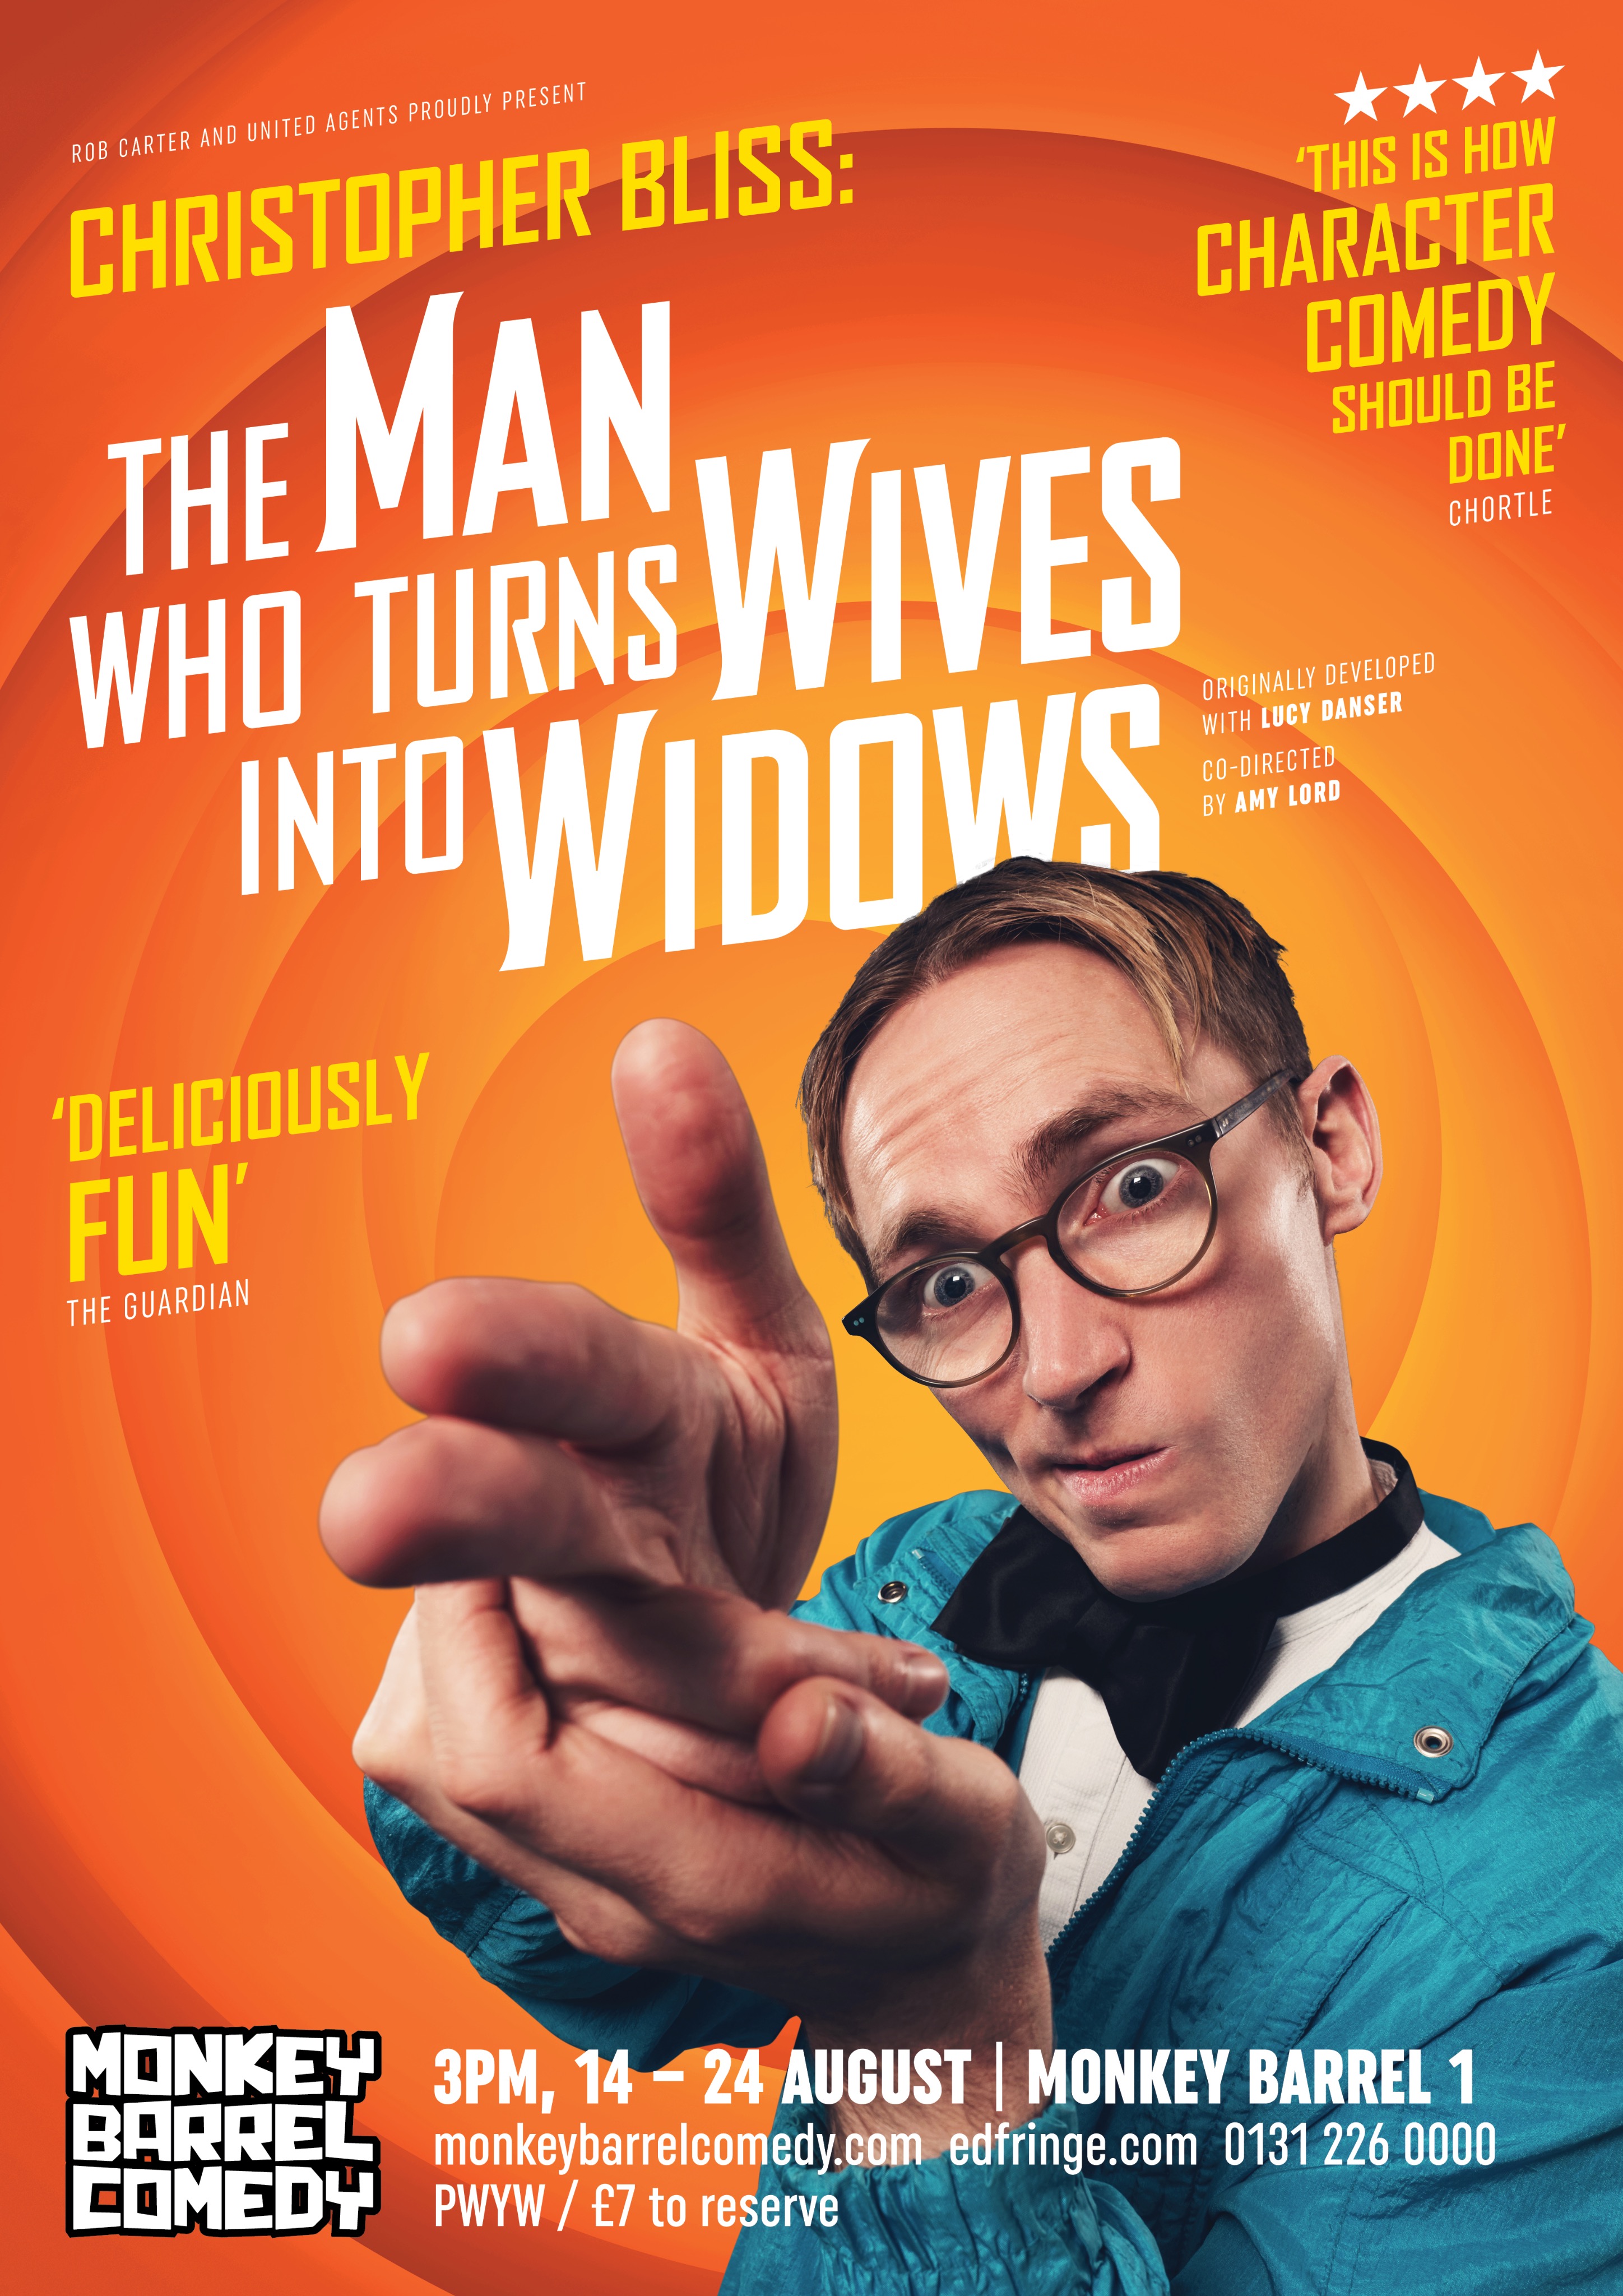 The poster for Christopher Bliss: The Man Who Turns Wives Into Widows